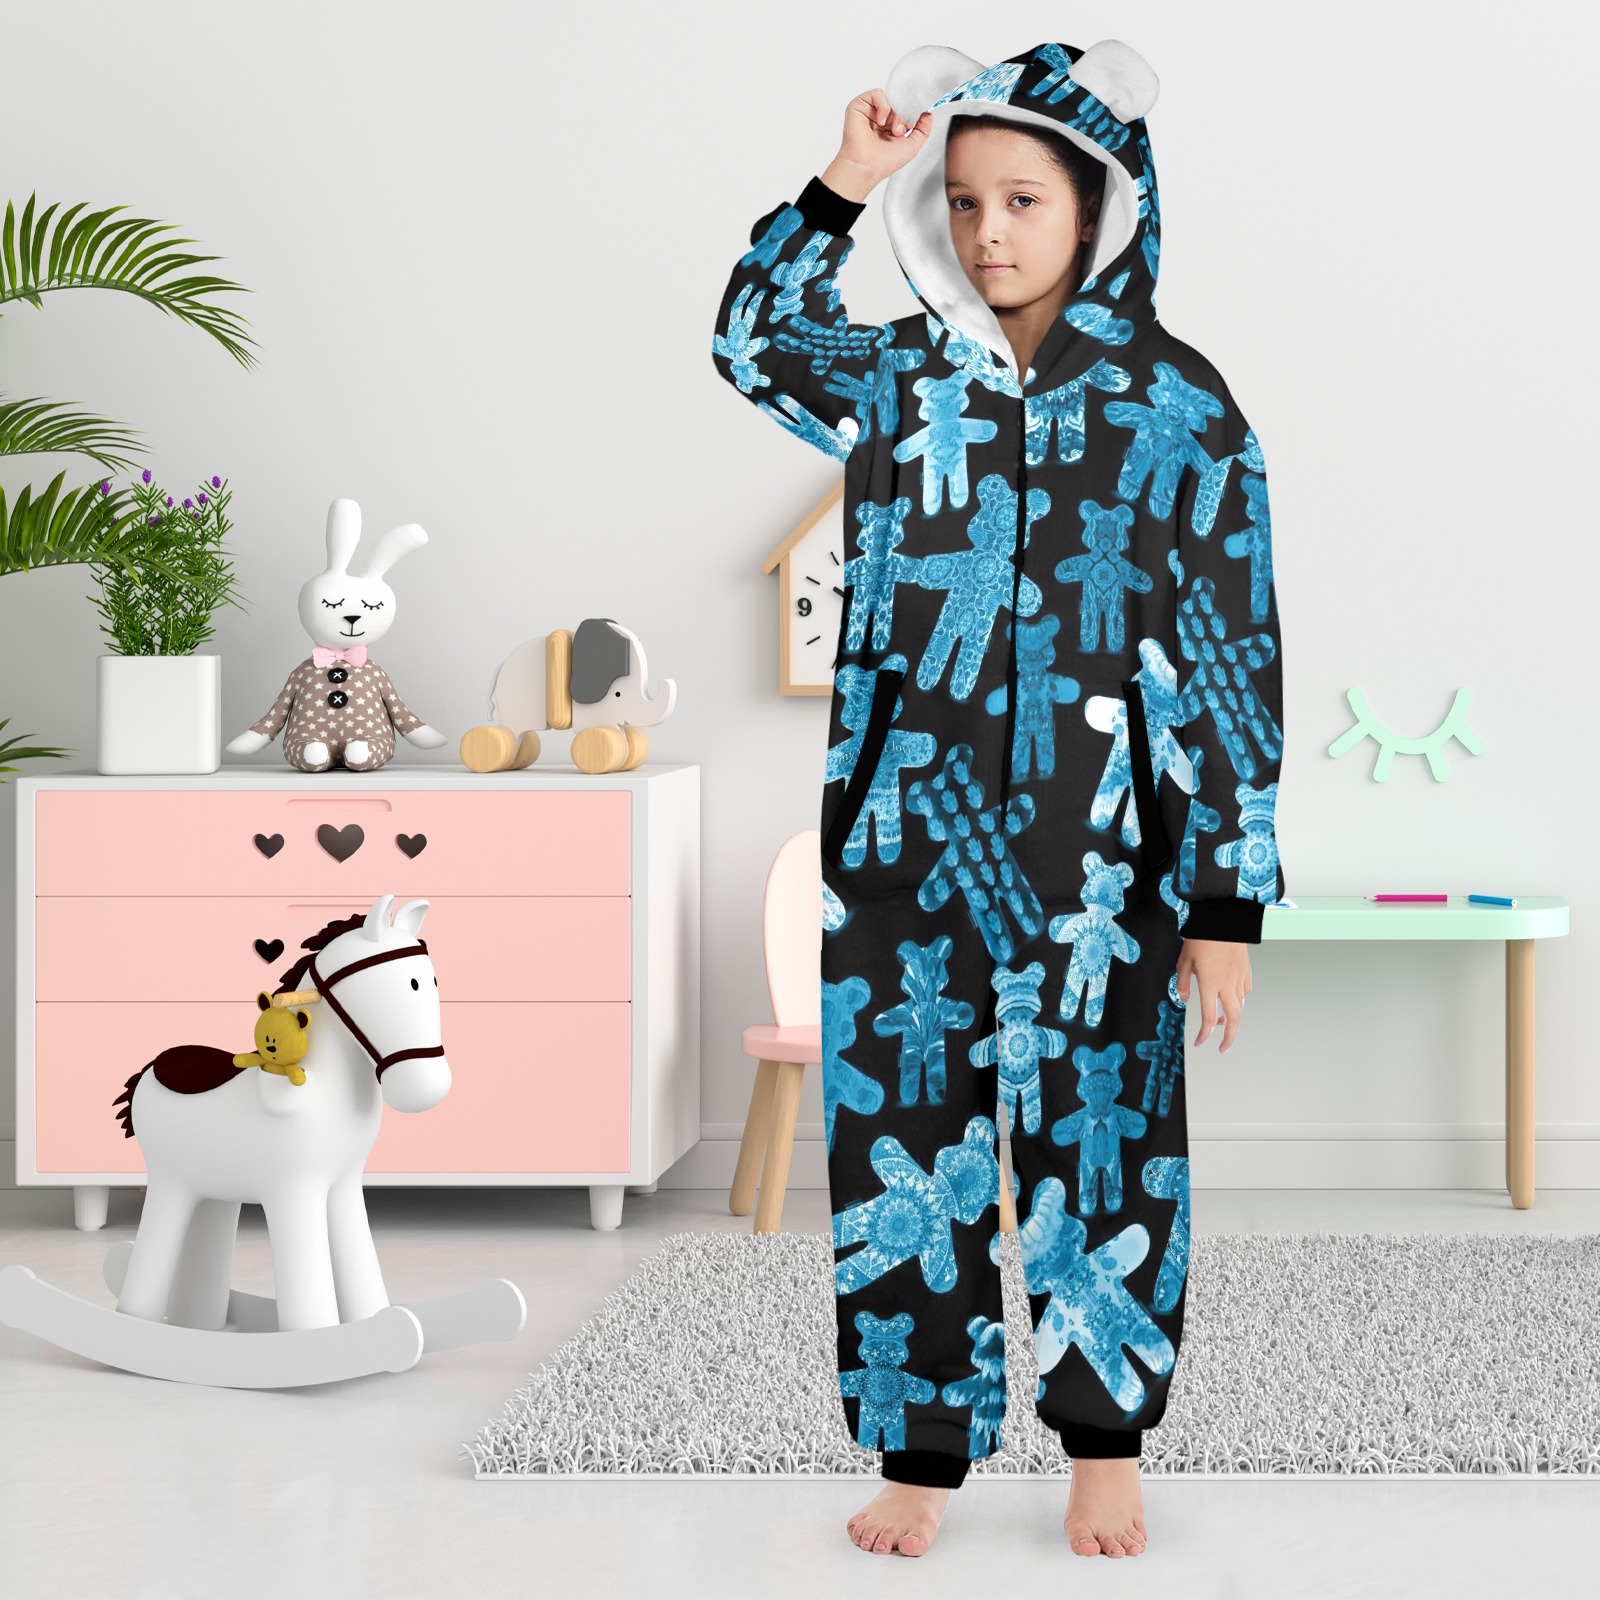 teddy bear assortiment 6 One-Piece Zip Up Hooded Pajamas for Big Kids